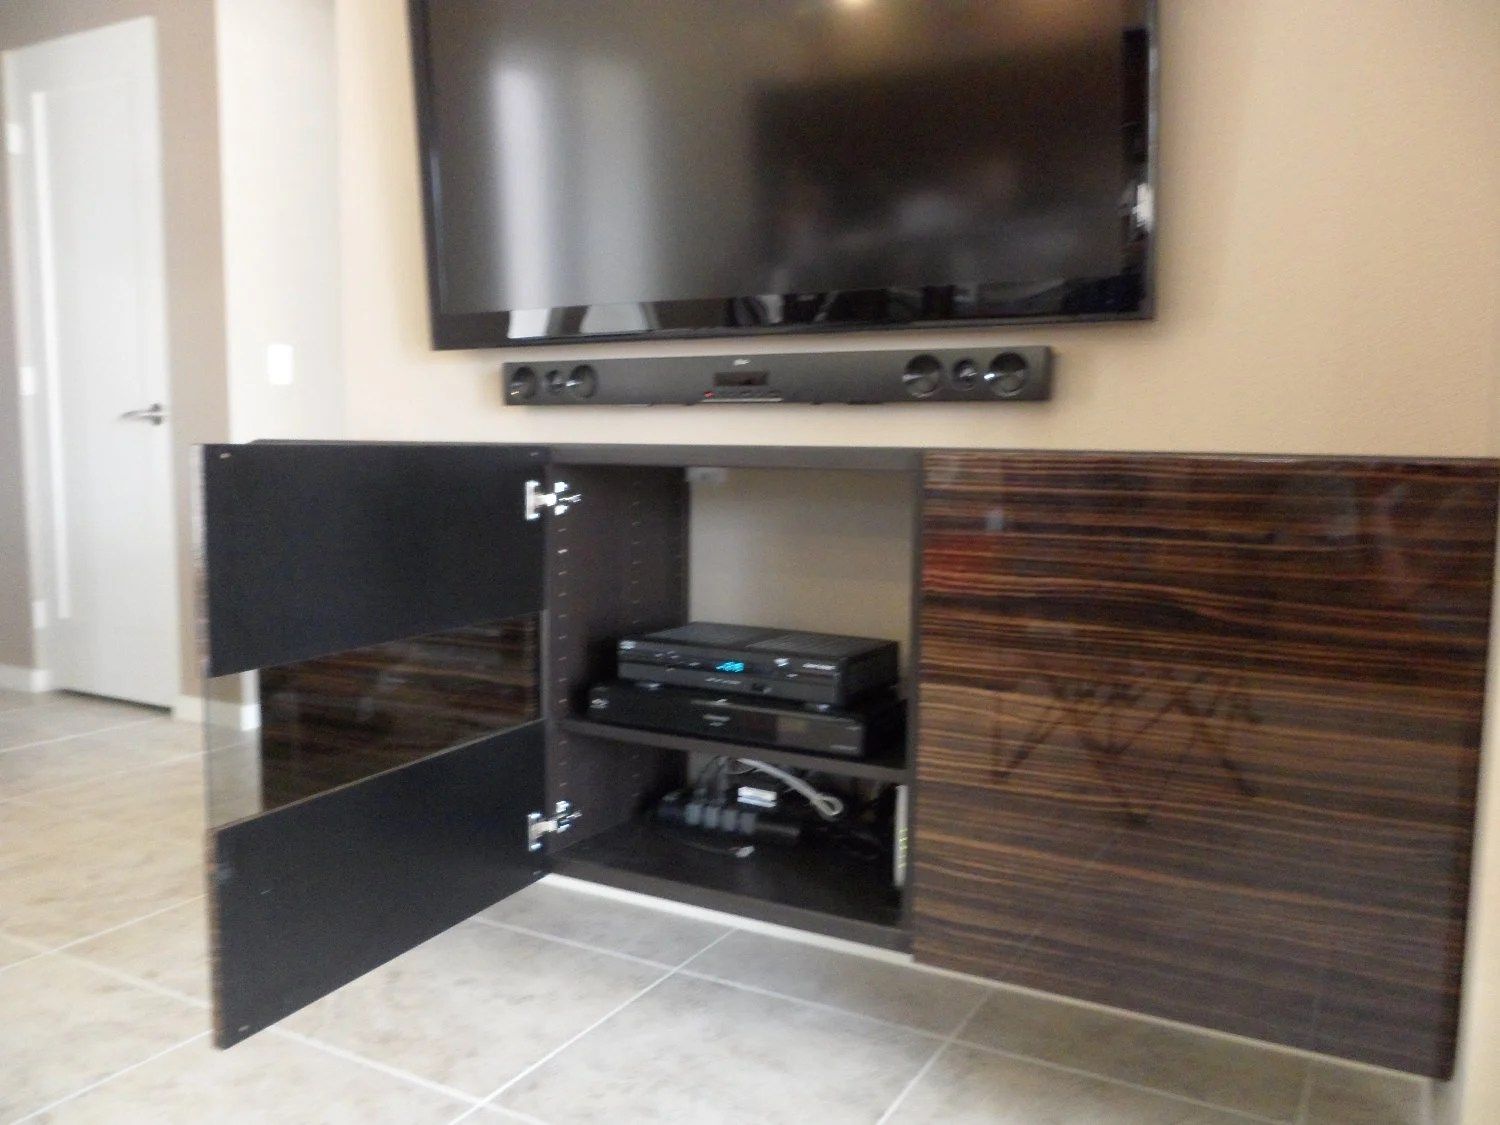 Besta Floating Media Cabinet With Flat Panel Tv – Ikea Hackers For Wall Mounted Tv Cabinet Ikea (View 12 of 15)